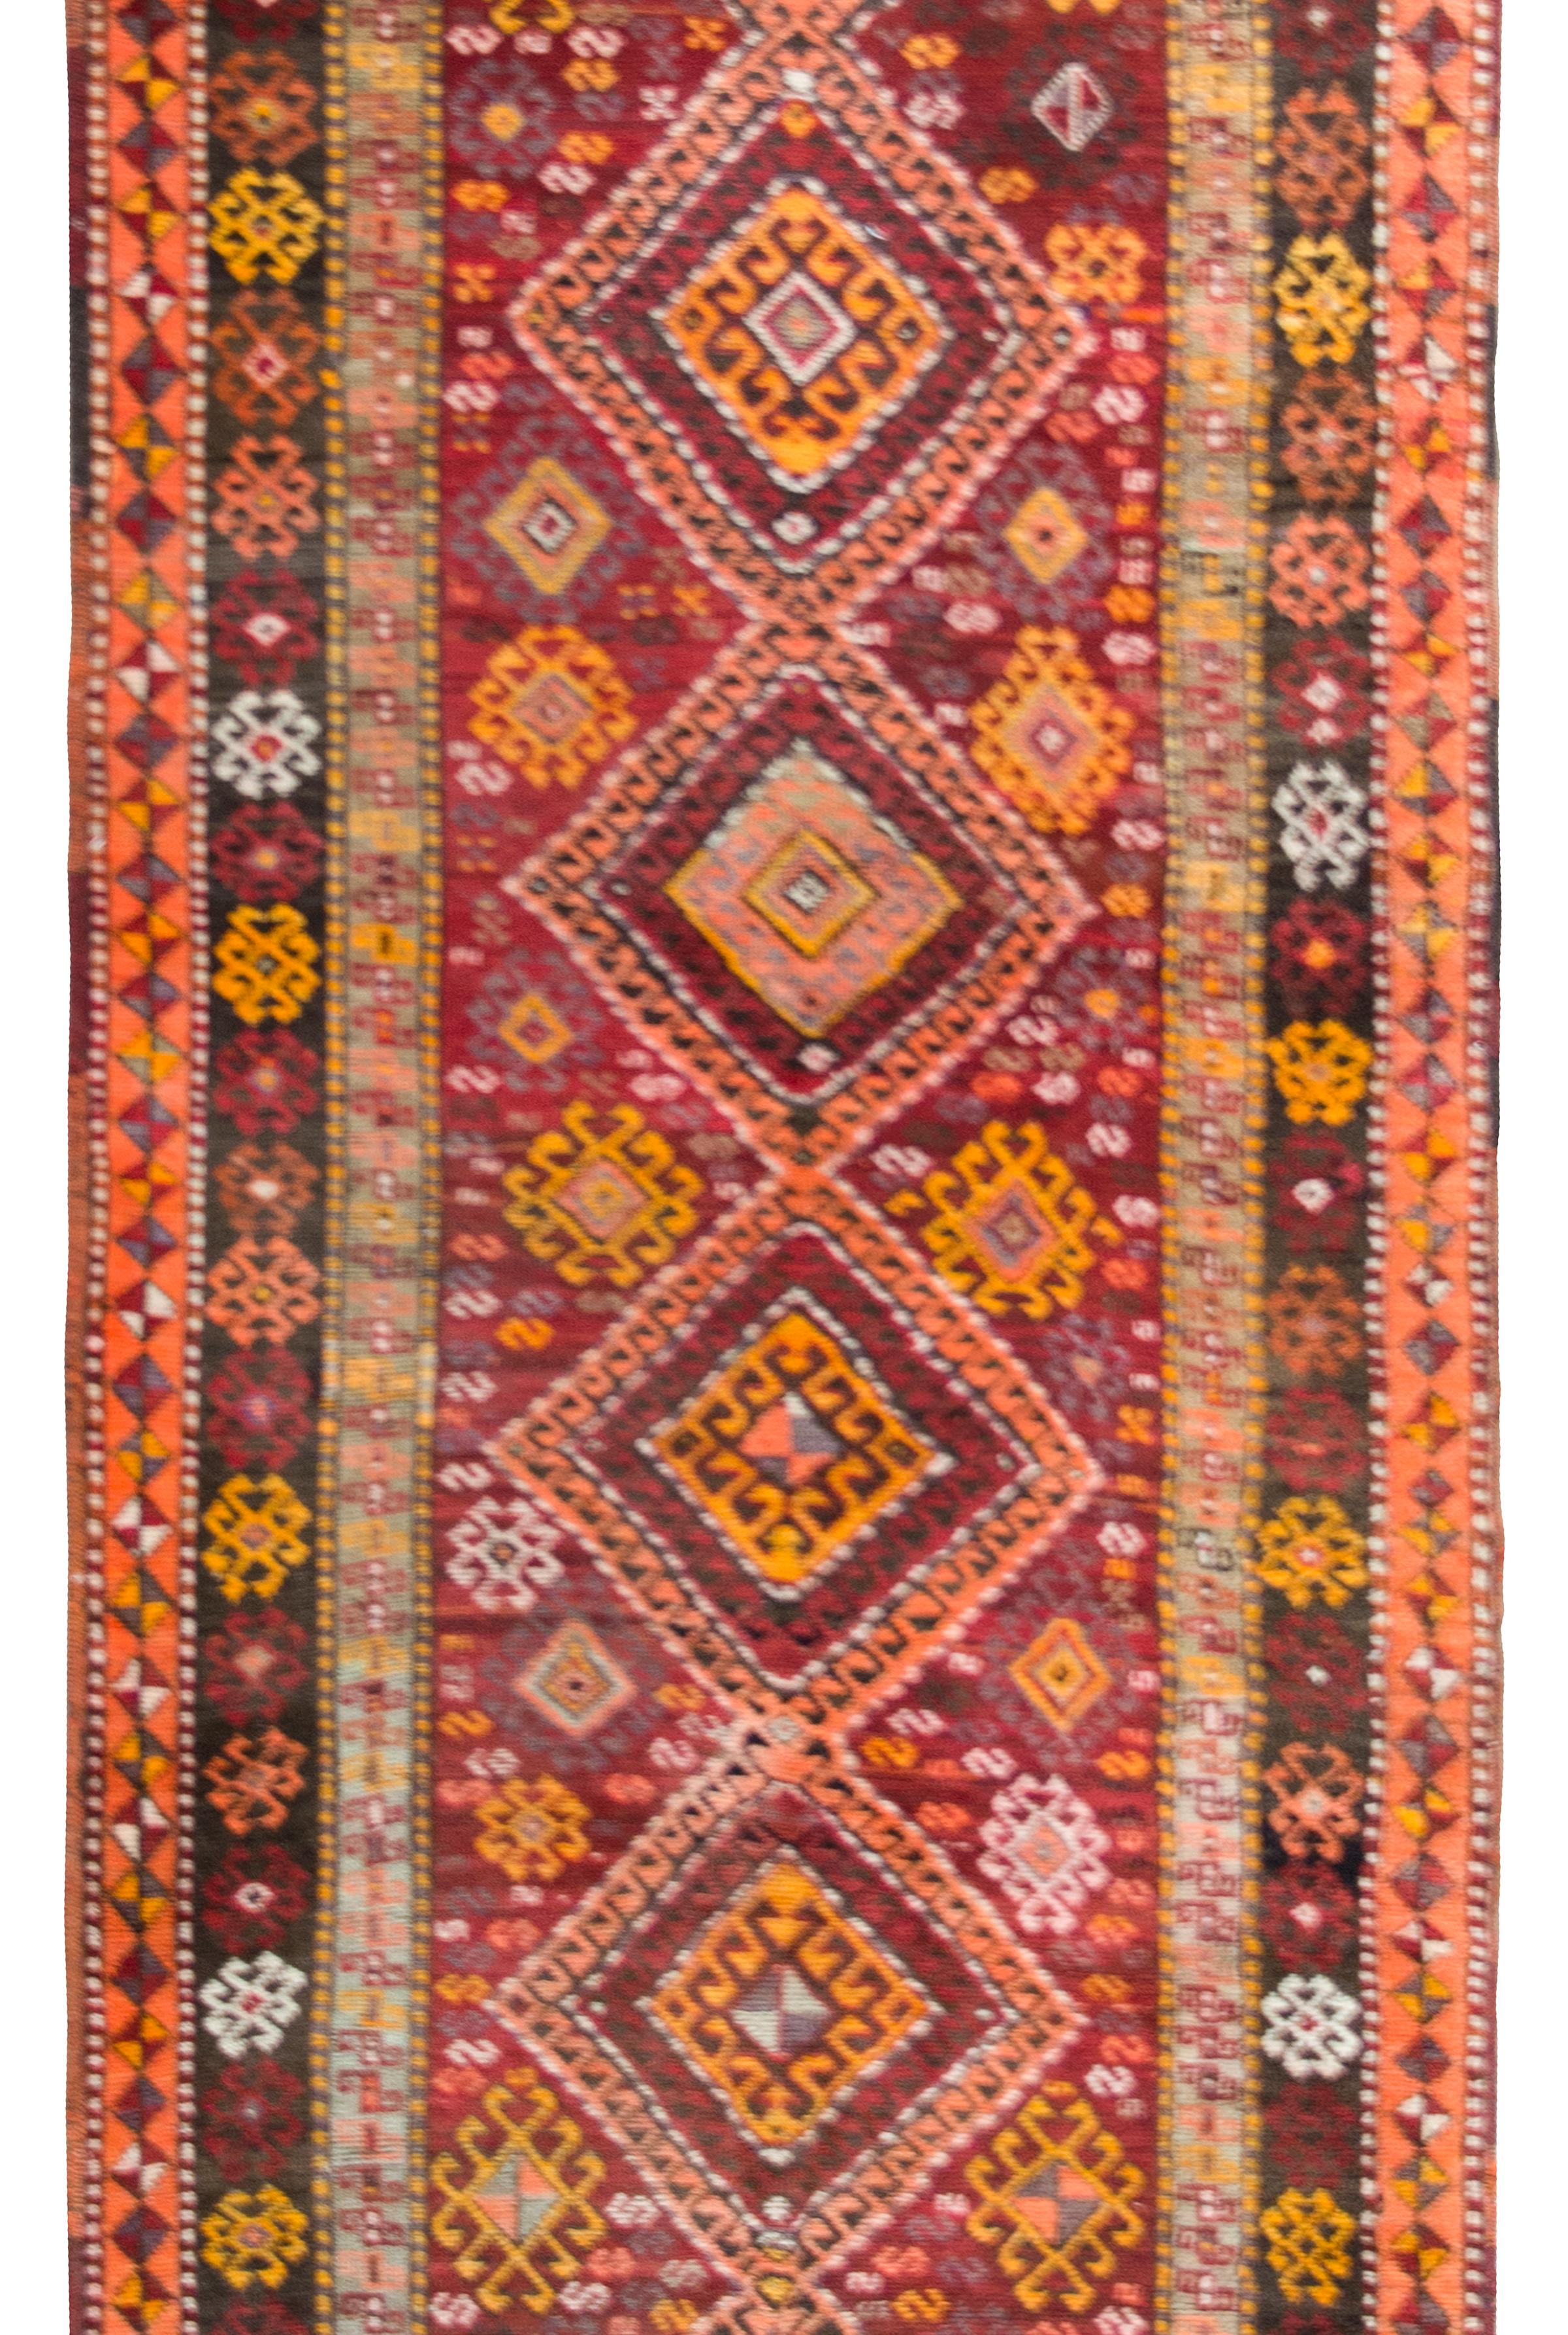 A bold and brilliant early 20th century Turkish Kars rug with several central diamond medallion running the length, and surrounded by field of stylized flowers, all surrounded by a complex border of even more stylized flowers, and all woven in